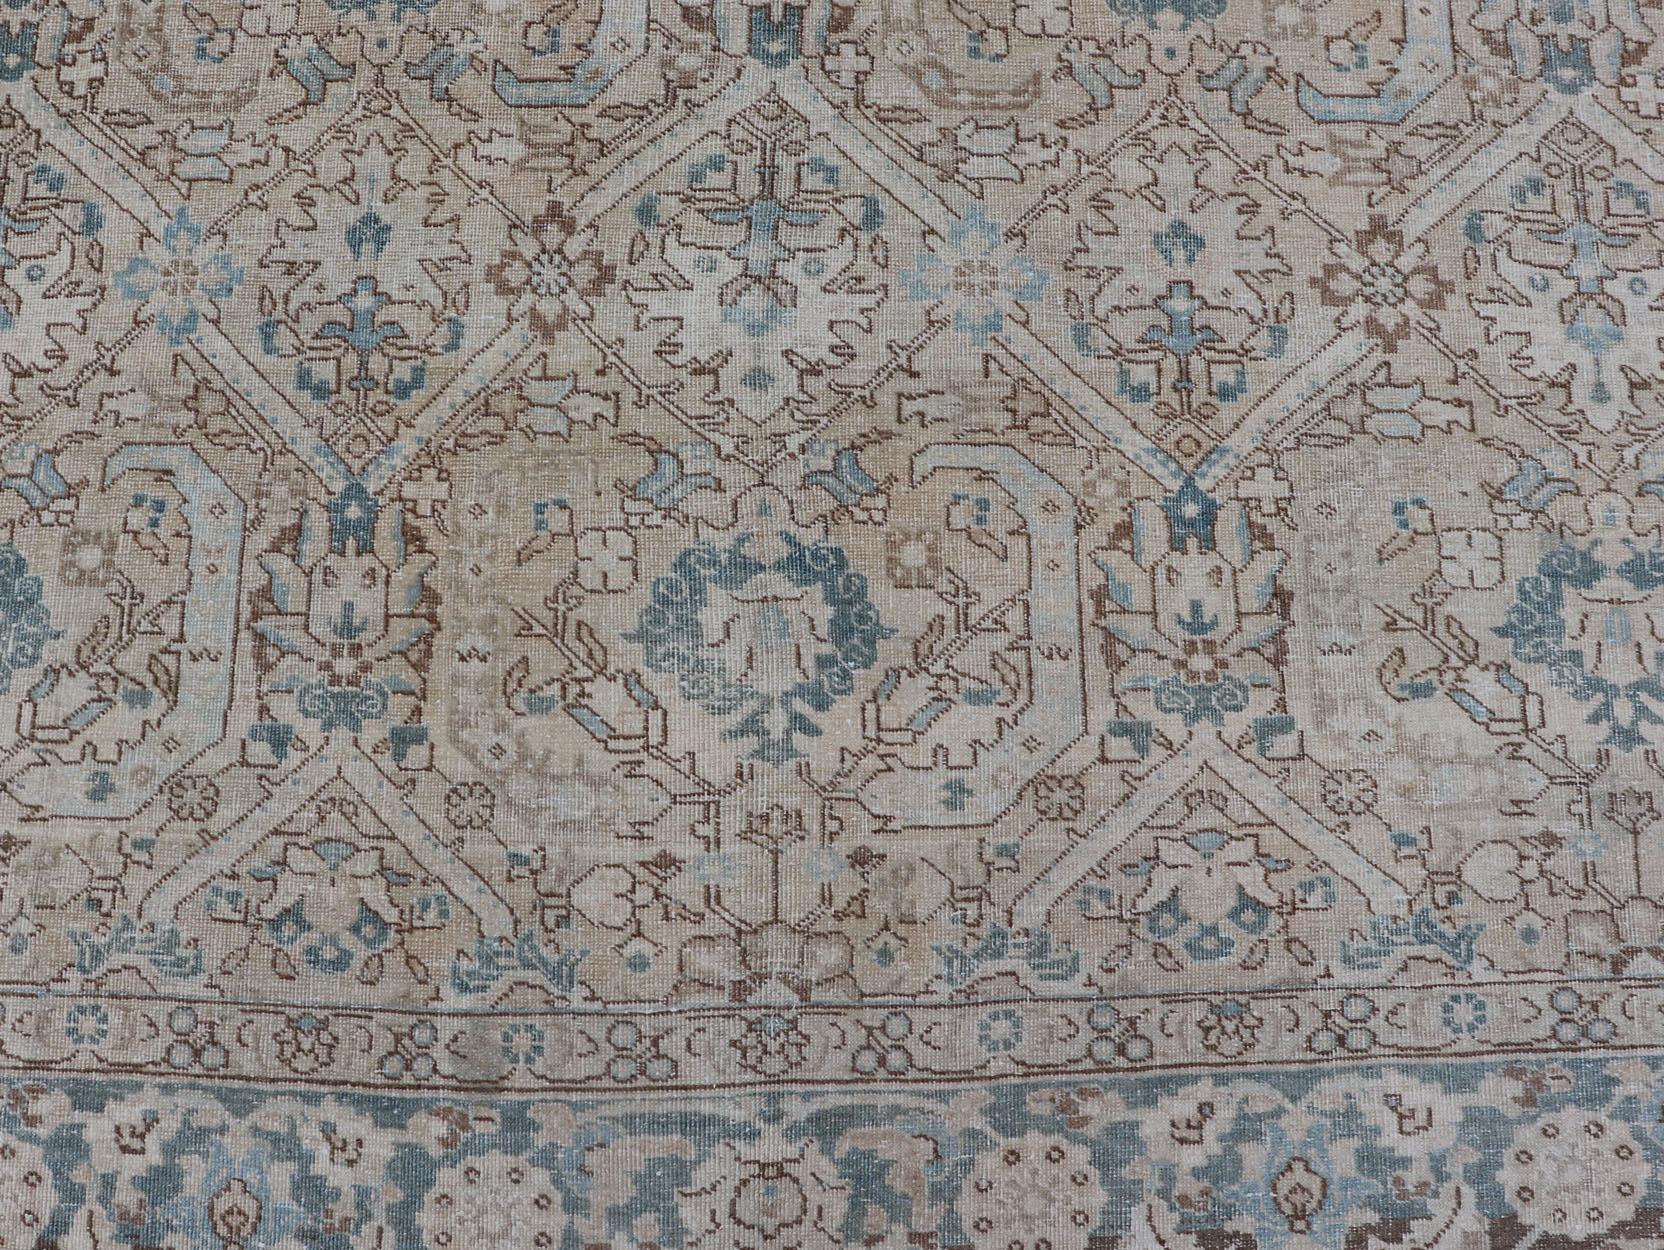 Blue, Brown and Tan Persian Antique Tabriz Rug with All-Over Geometric Design For Sale 5